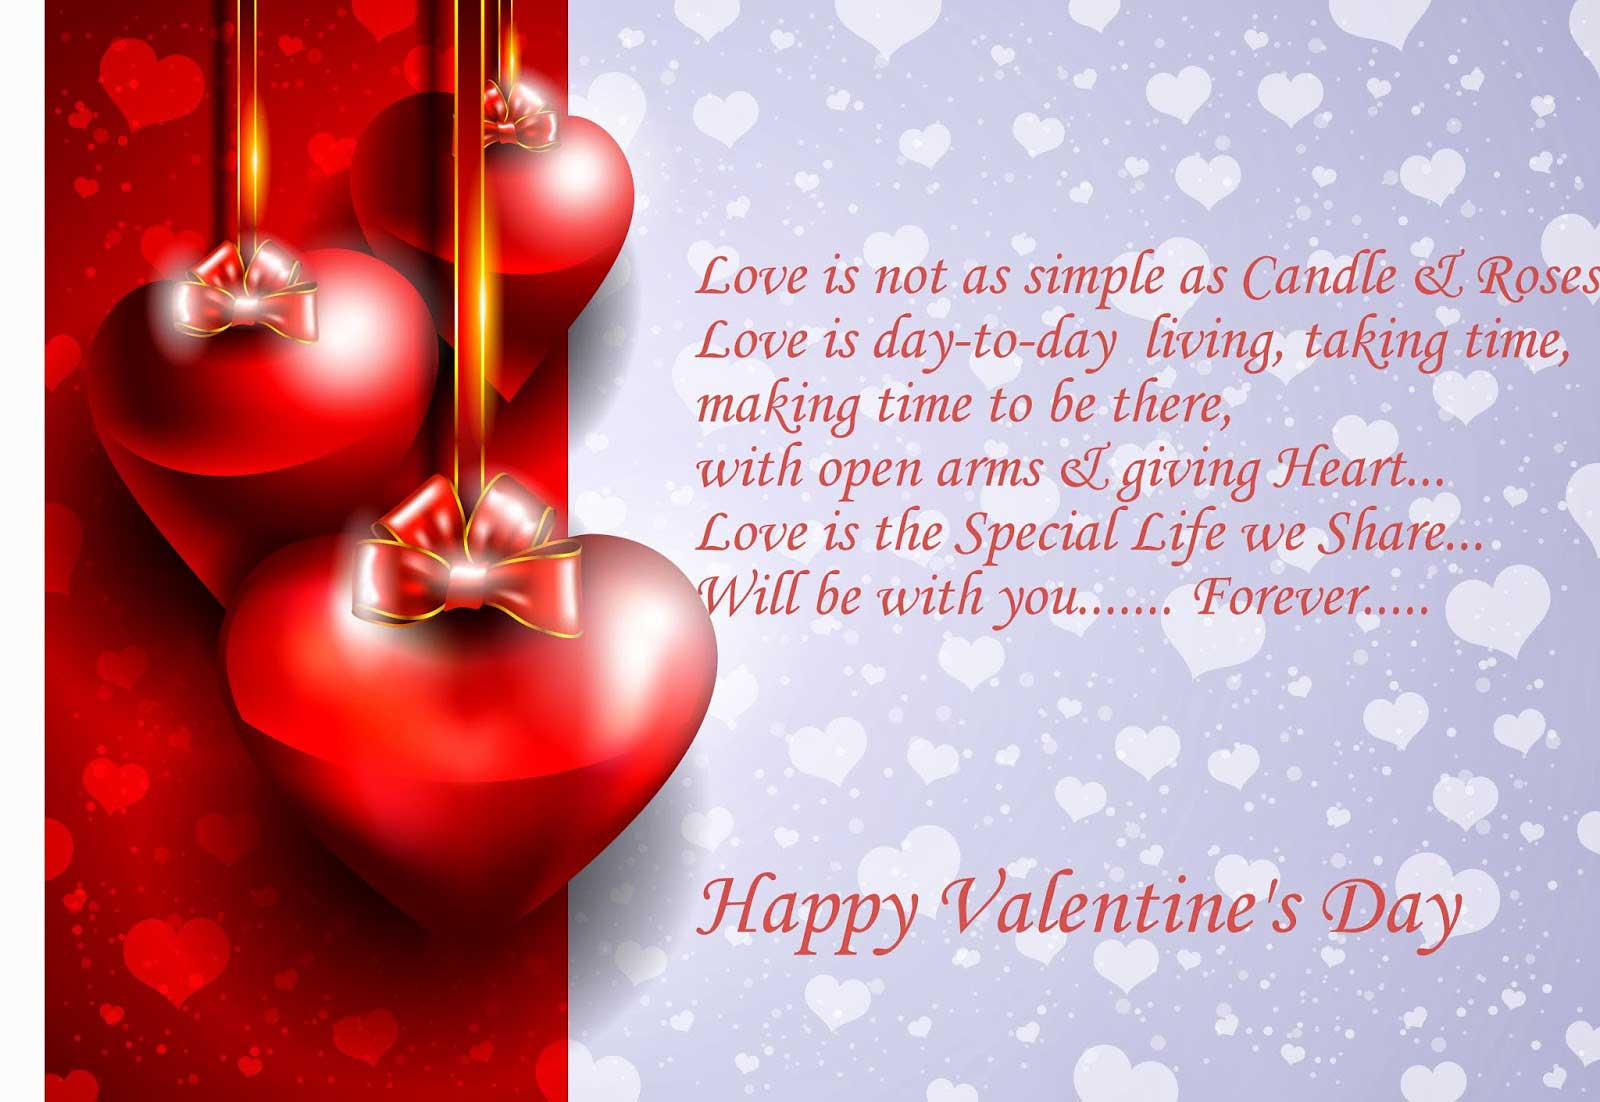 Valentines Day Image 2022 Quotes and HD Wallpaper